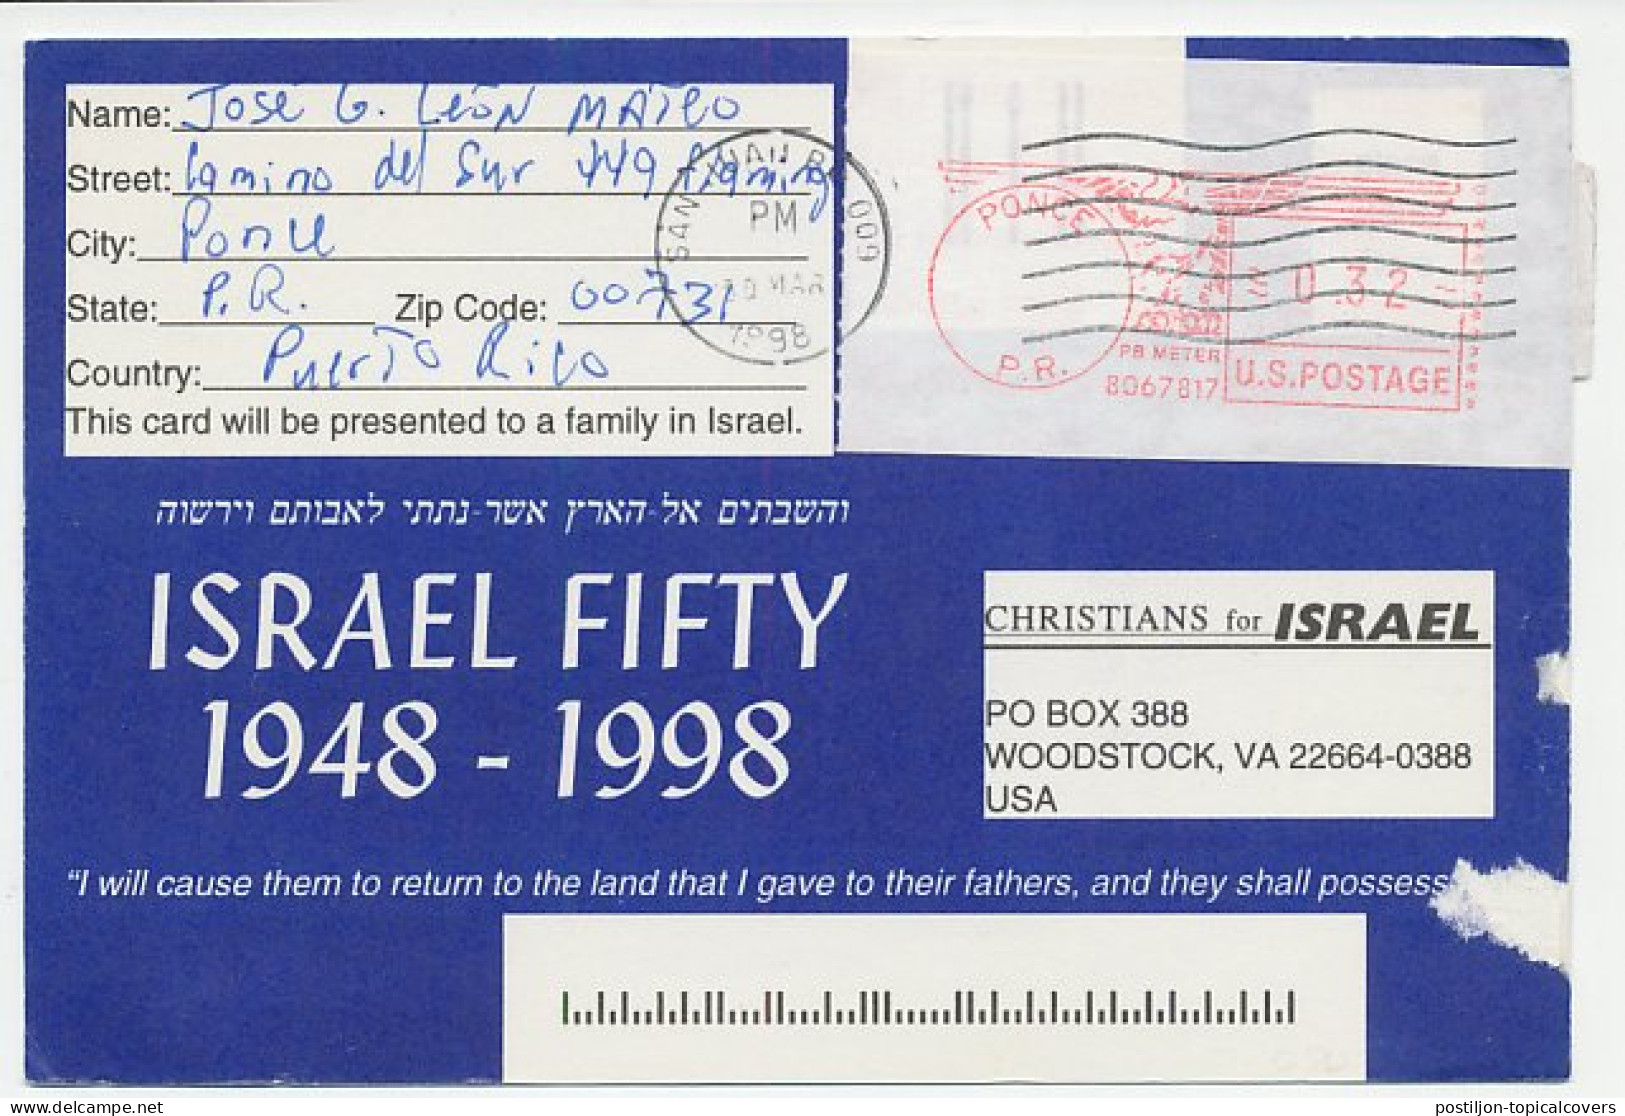 Picture Postcard USA 1998 Israel Fifty 1948-1998 - Mazel Tov ! - Unclassified